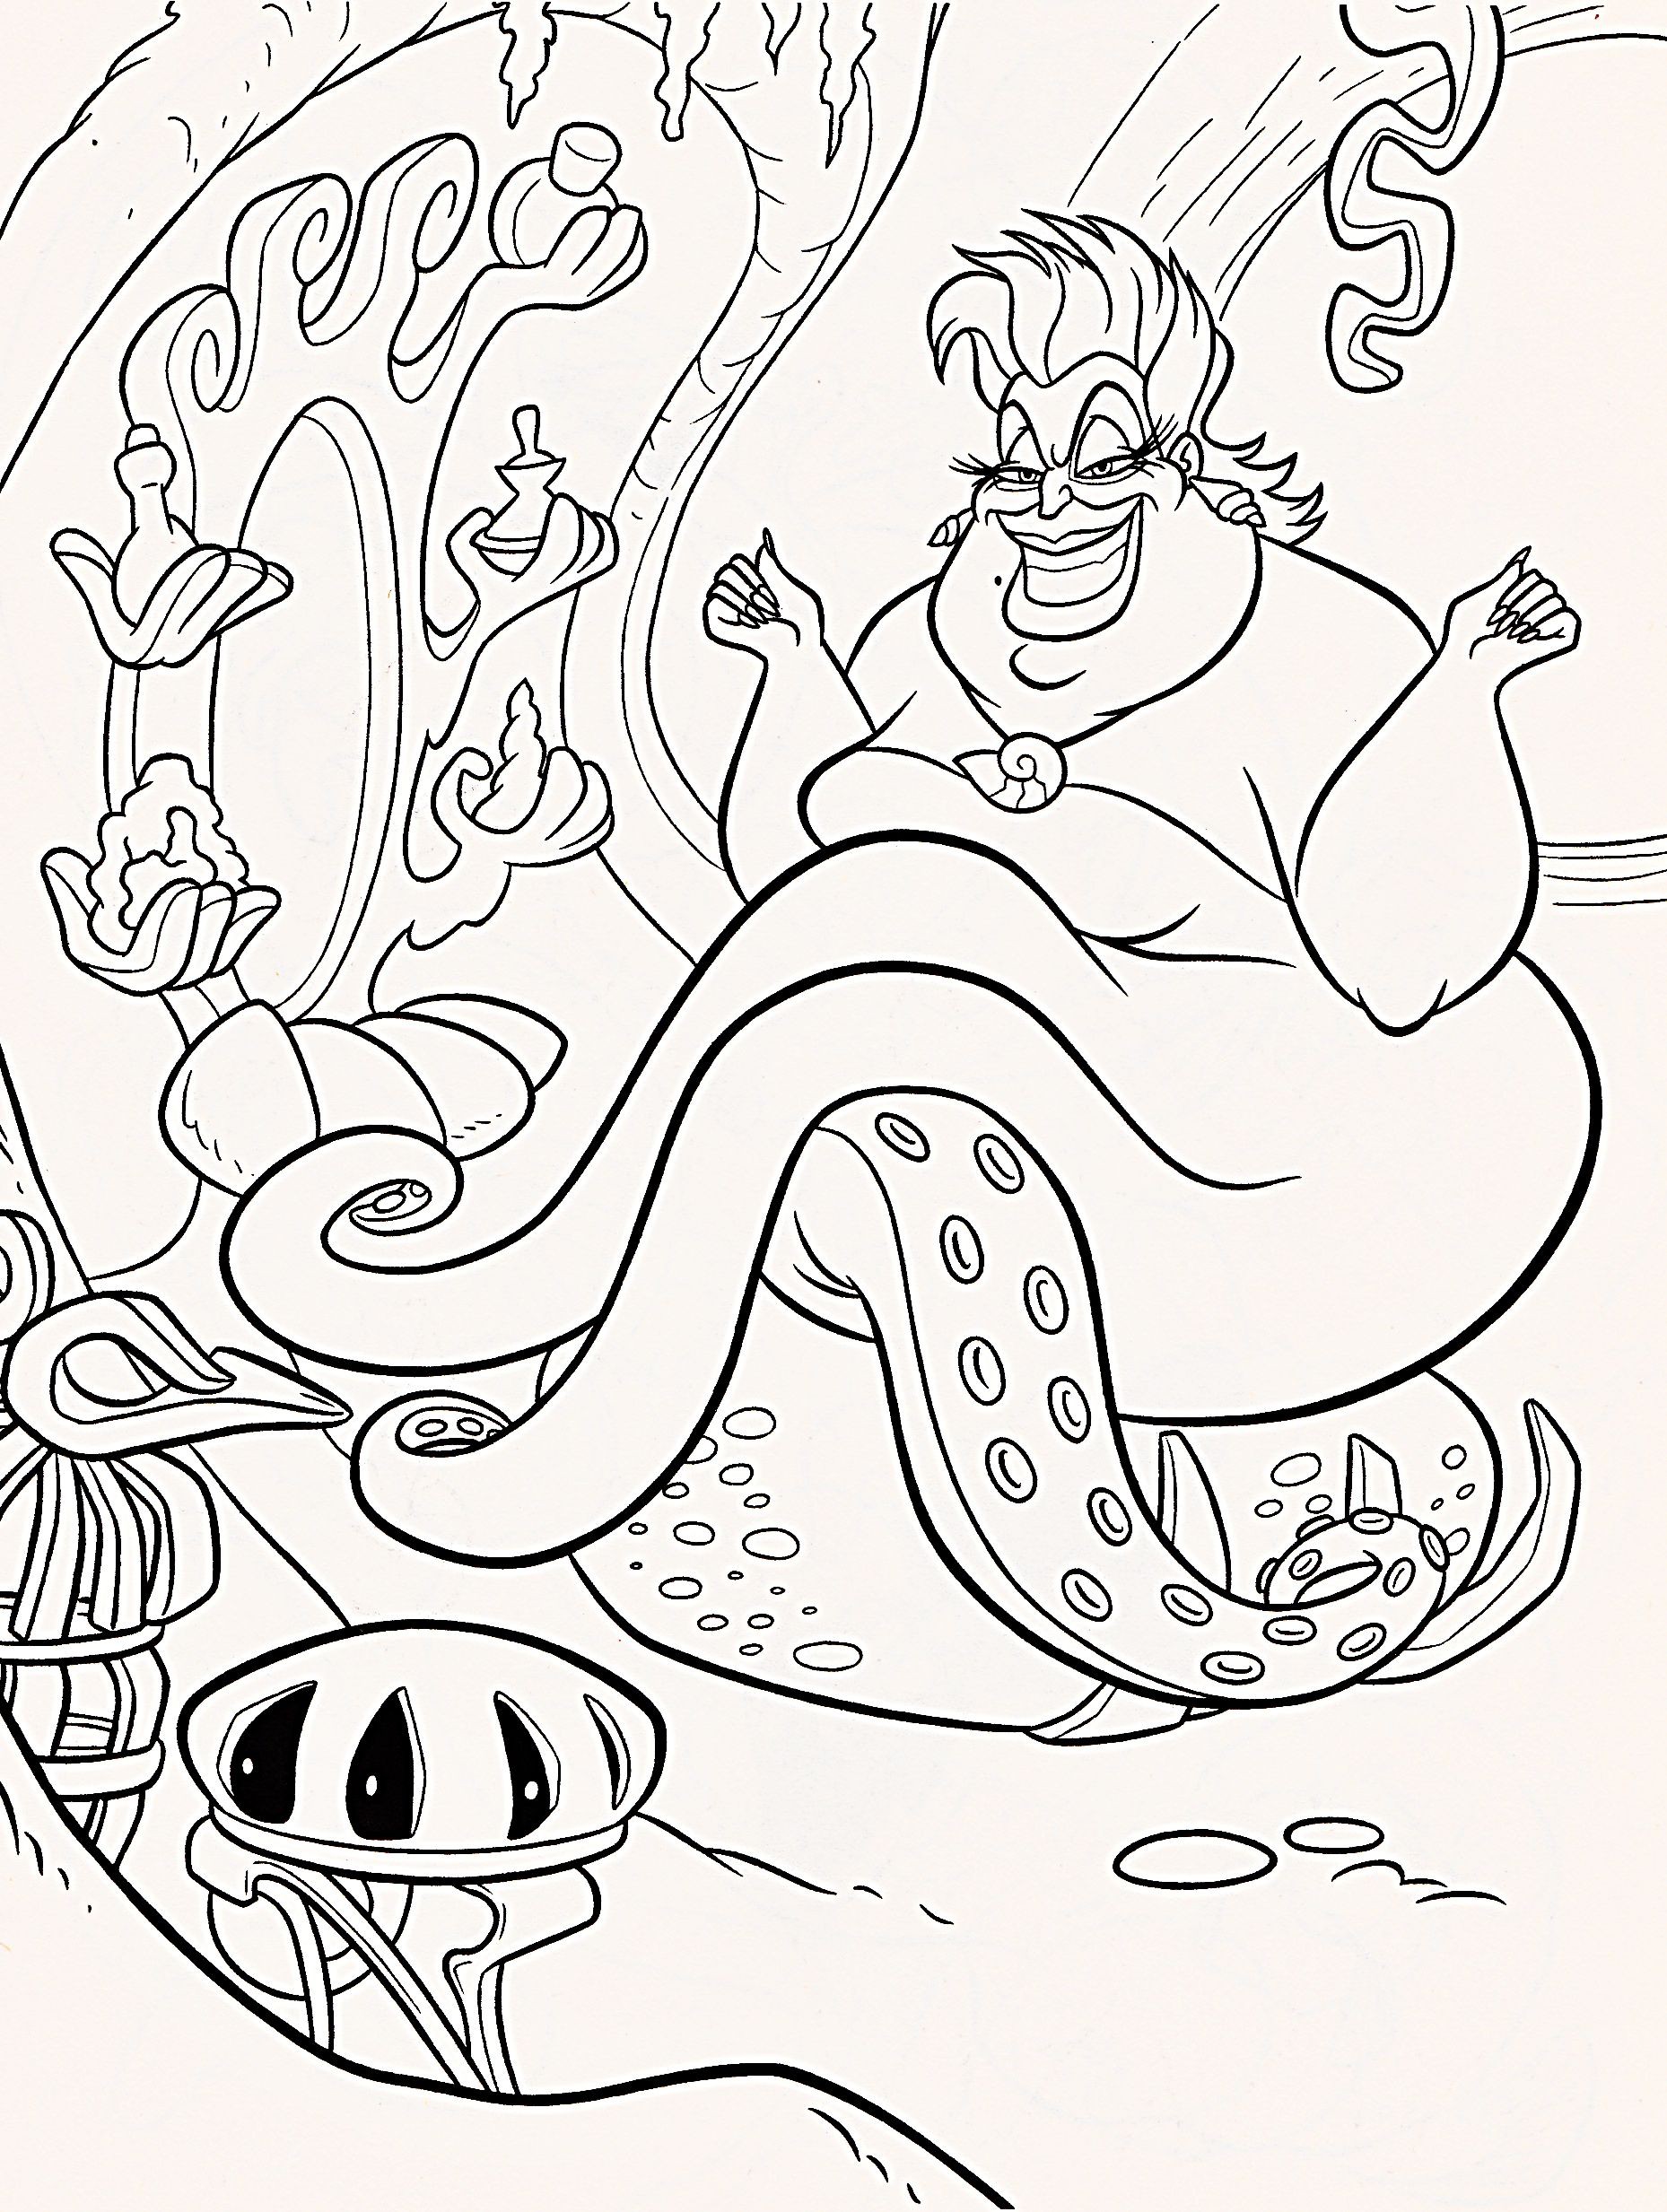 Princess Colouring Pages for Adults Wallpaper